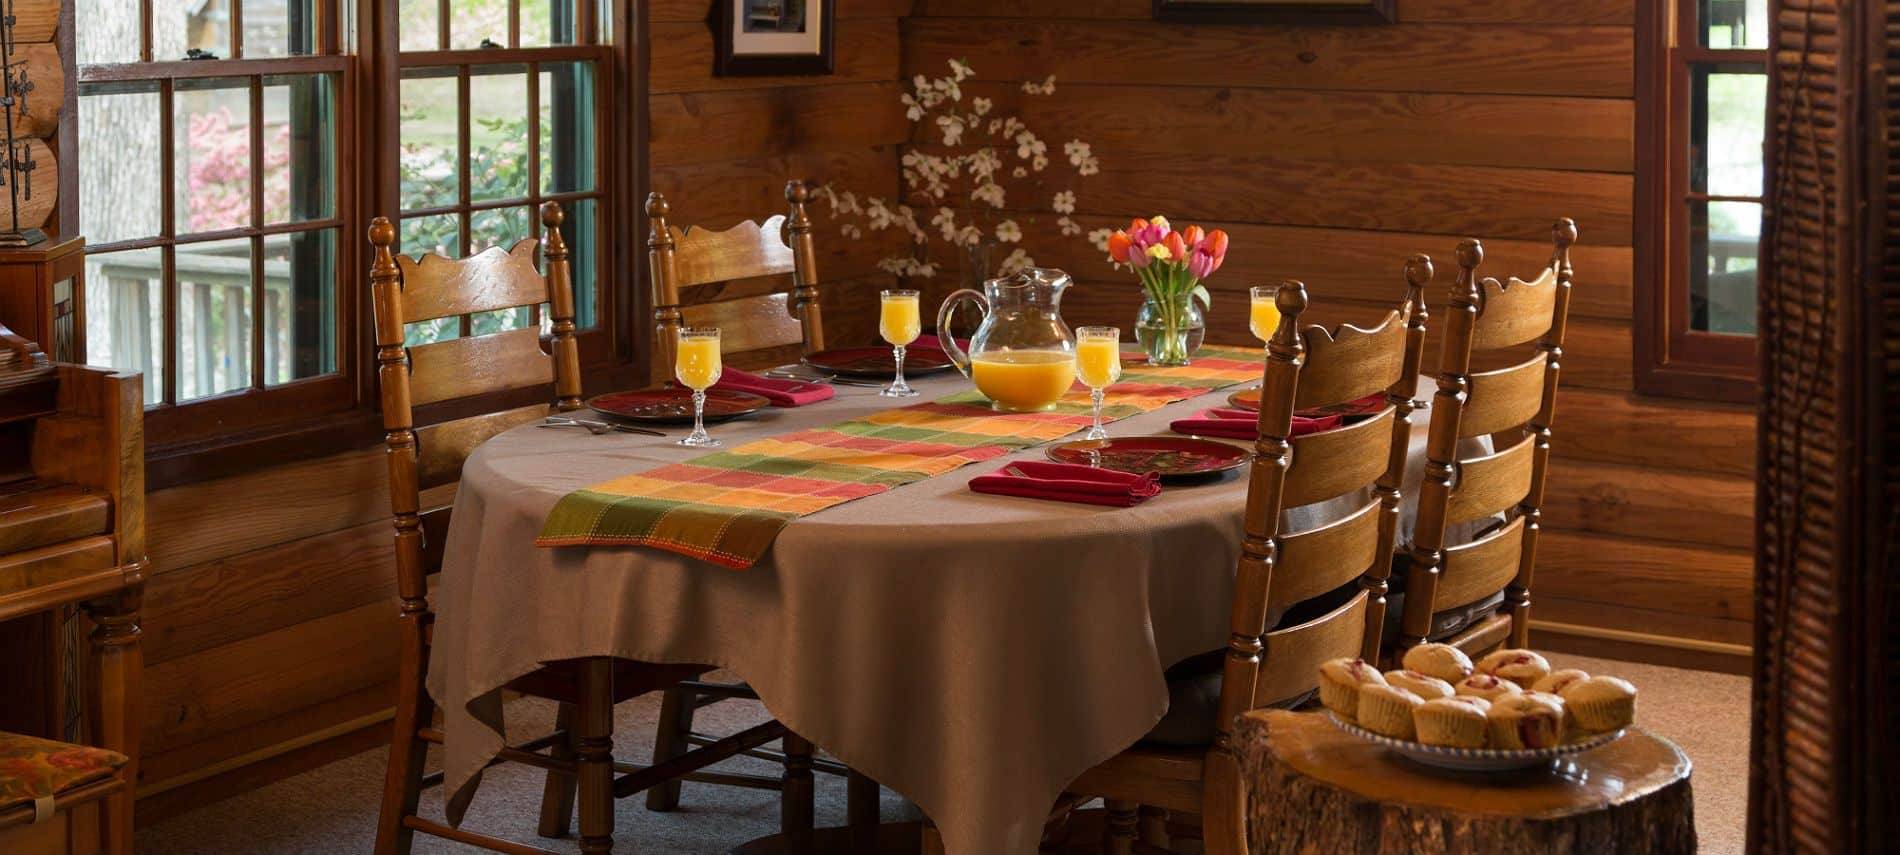 Dining room table set for four people with tan linens and multi colored napkins, orange juice and fresh flowers.